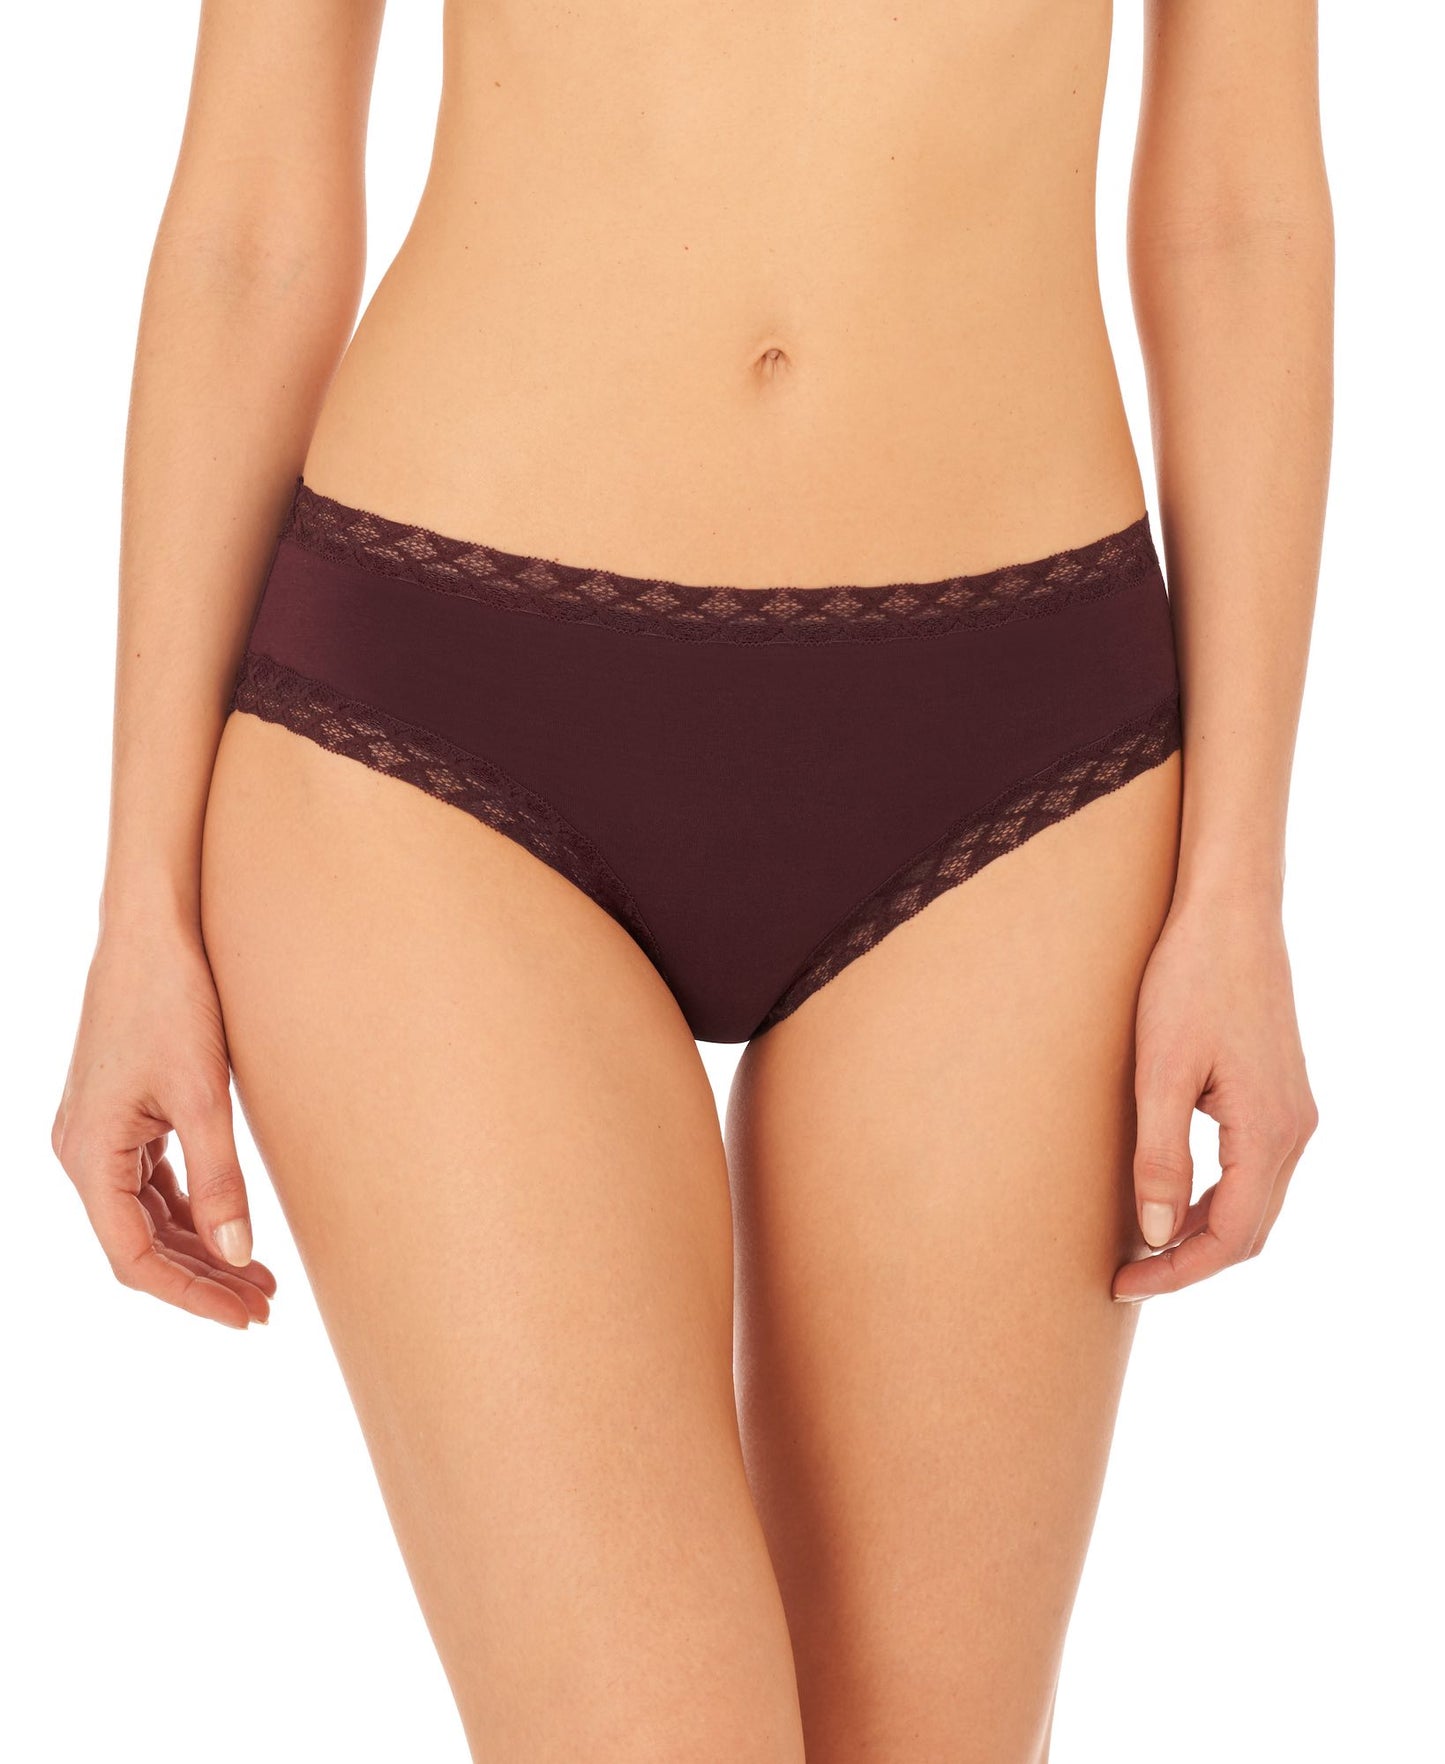 Bliss Girl brief - new early fall colors